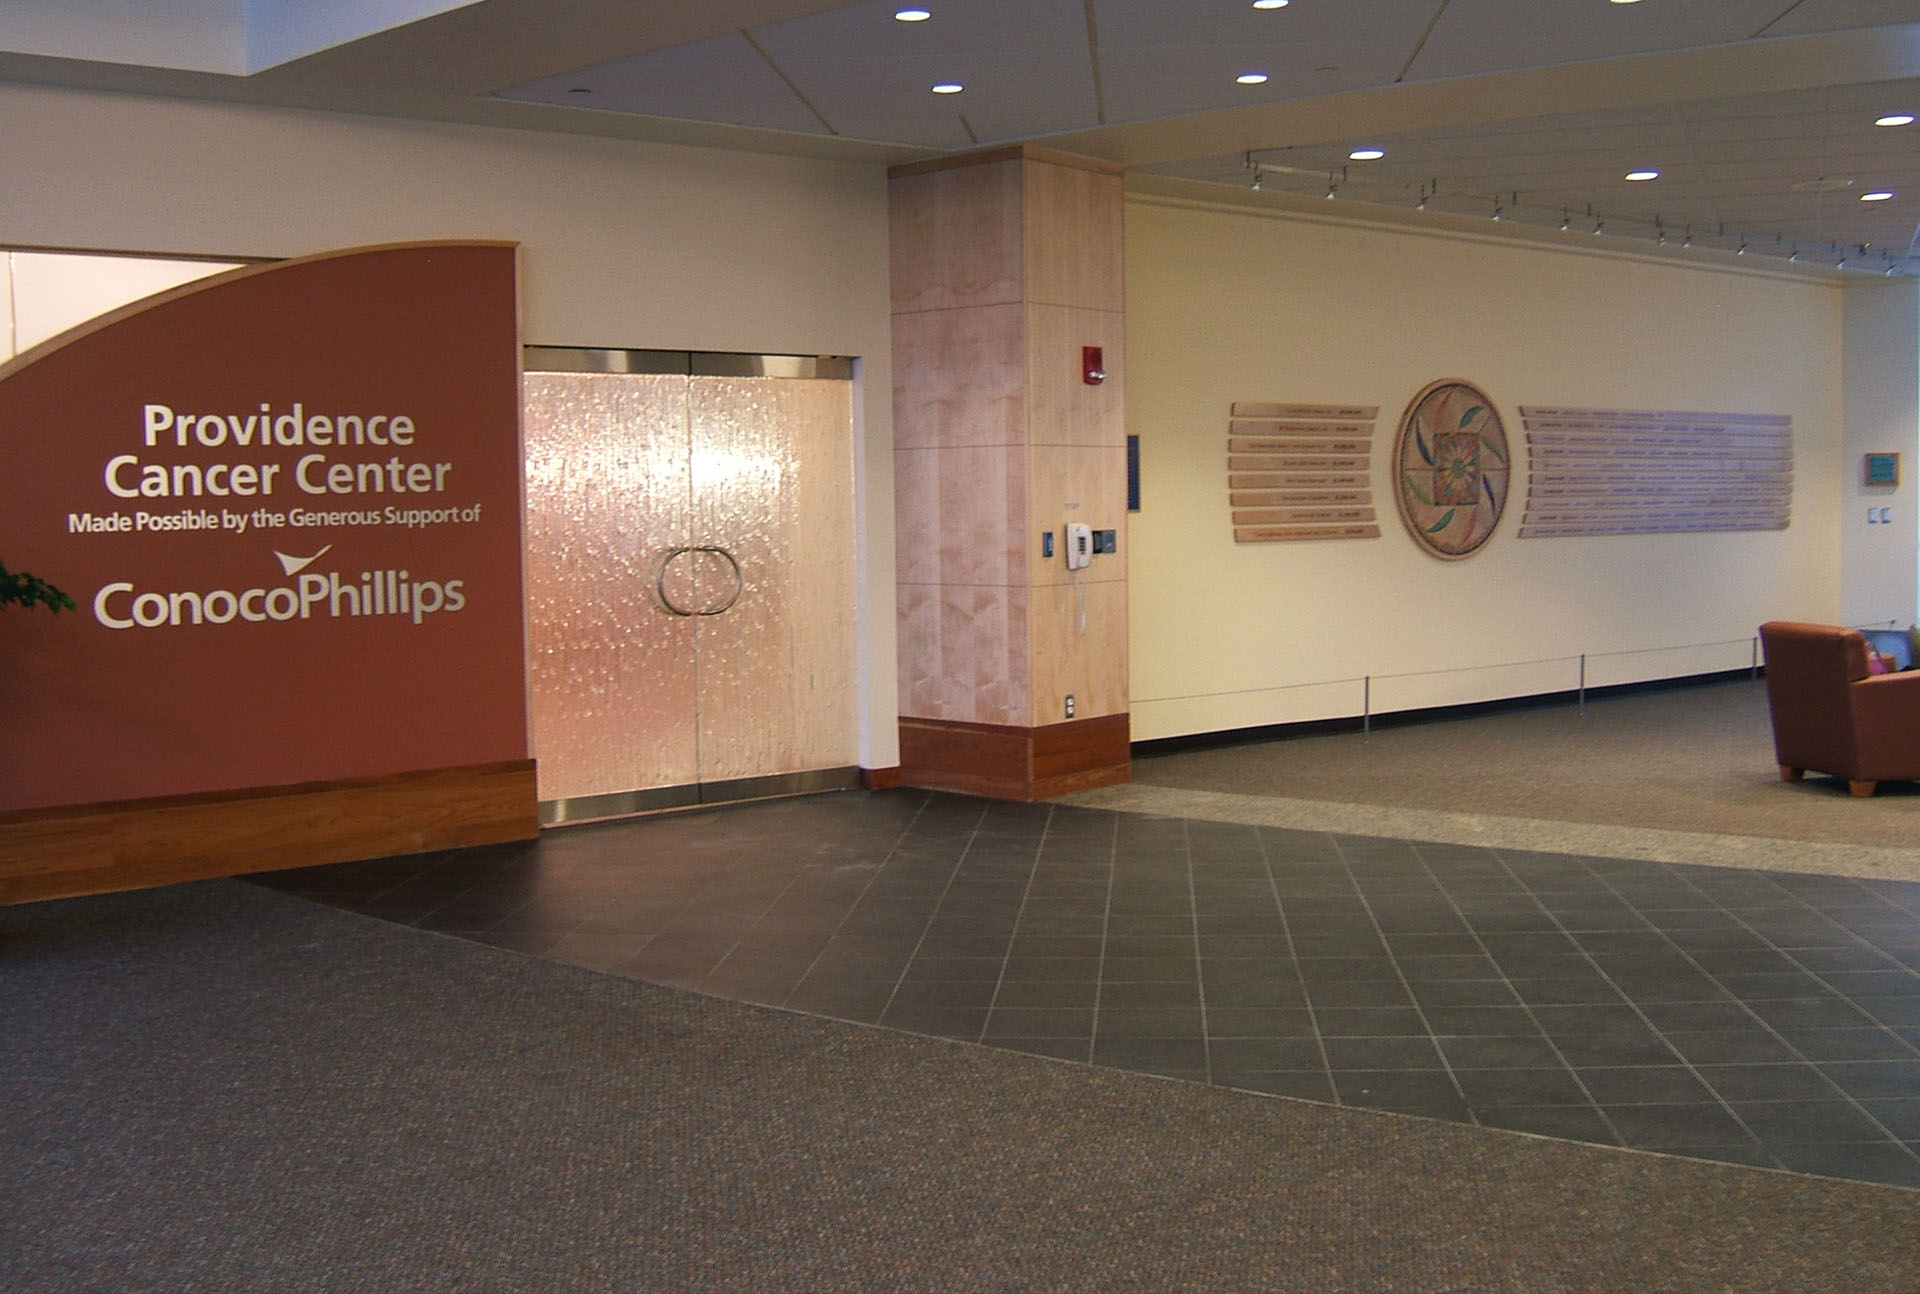 Lobby and Donor Wall